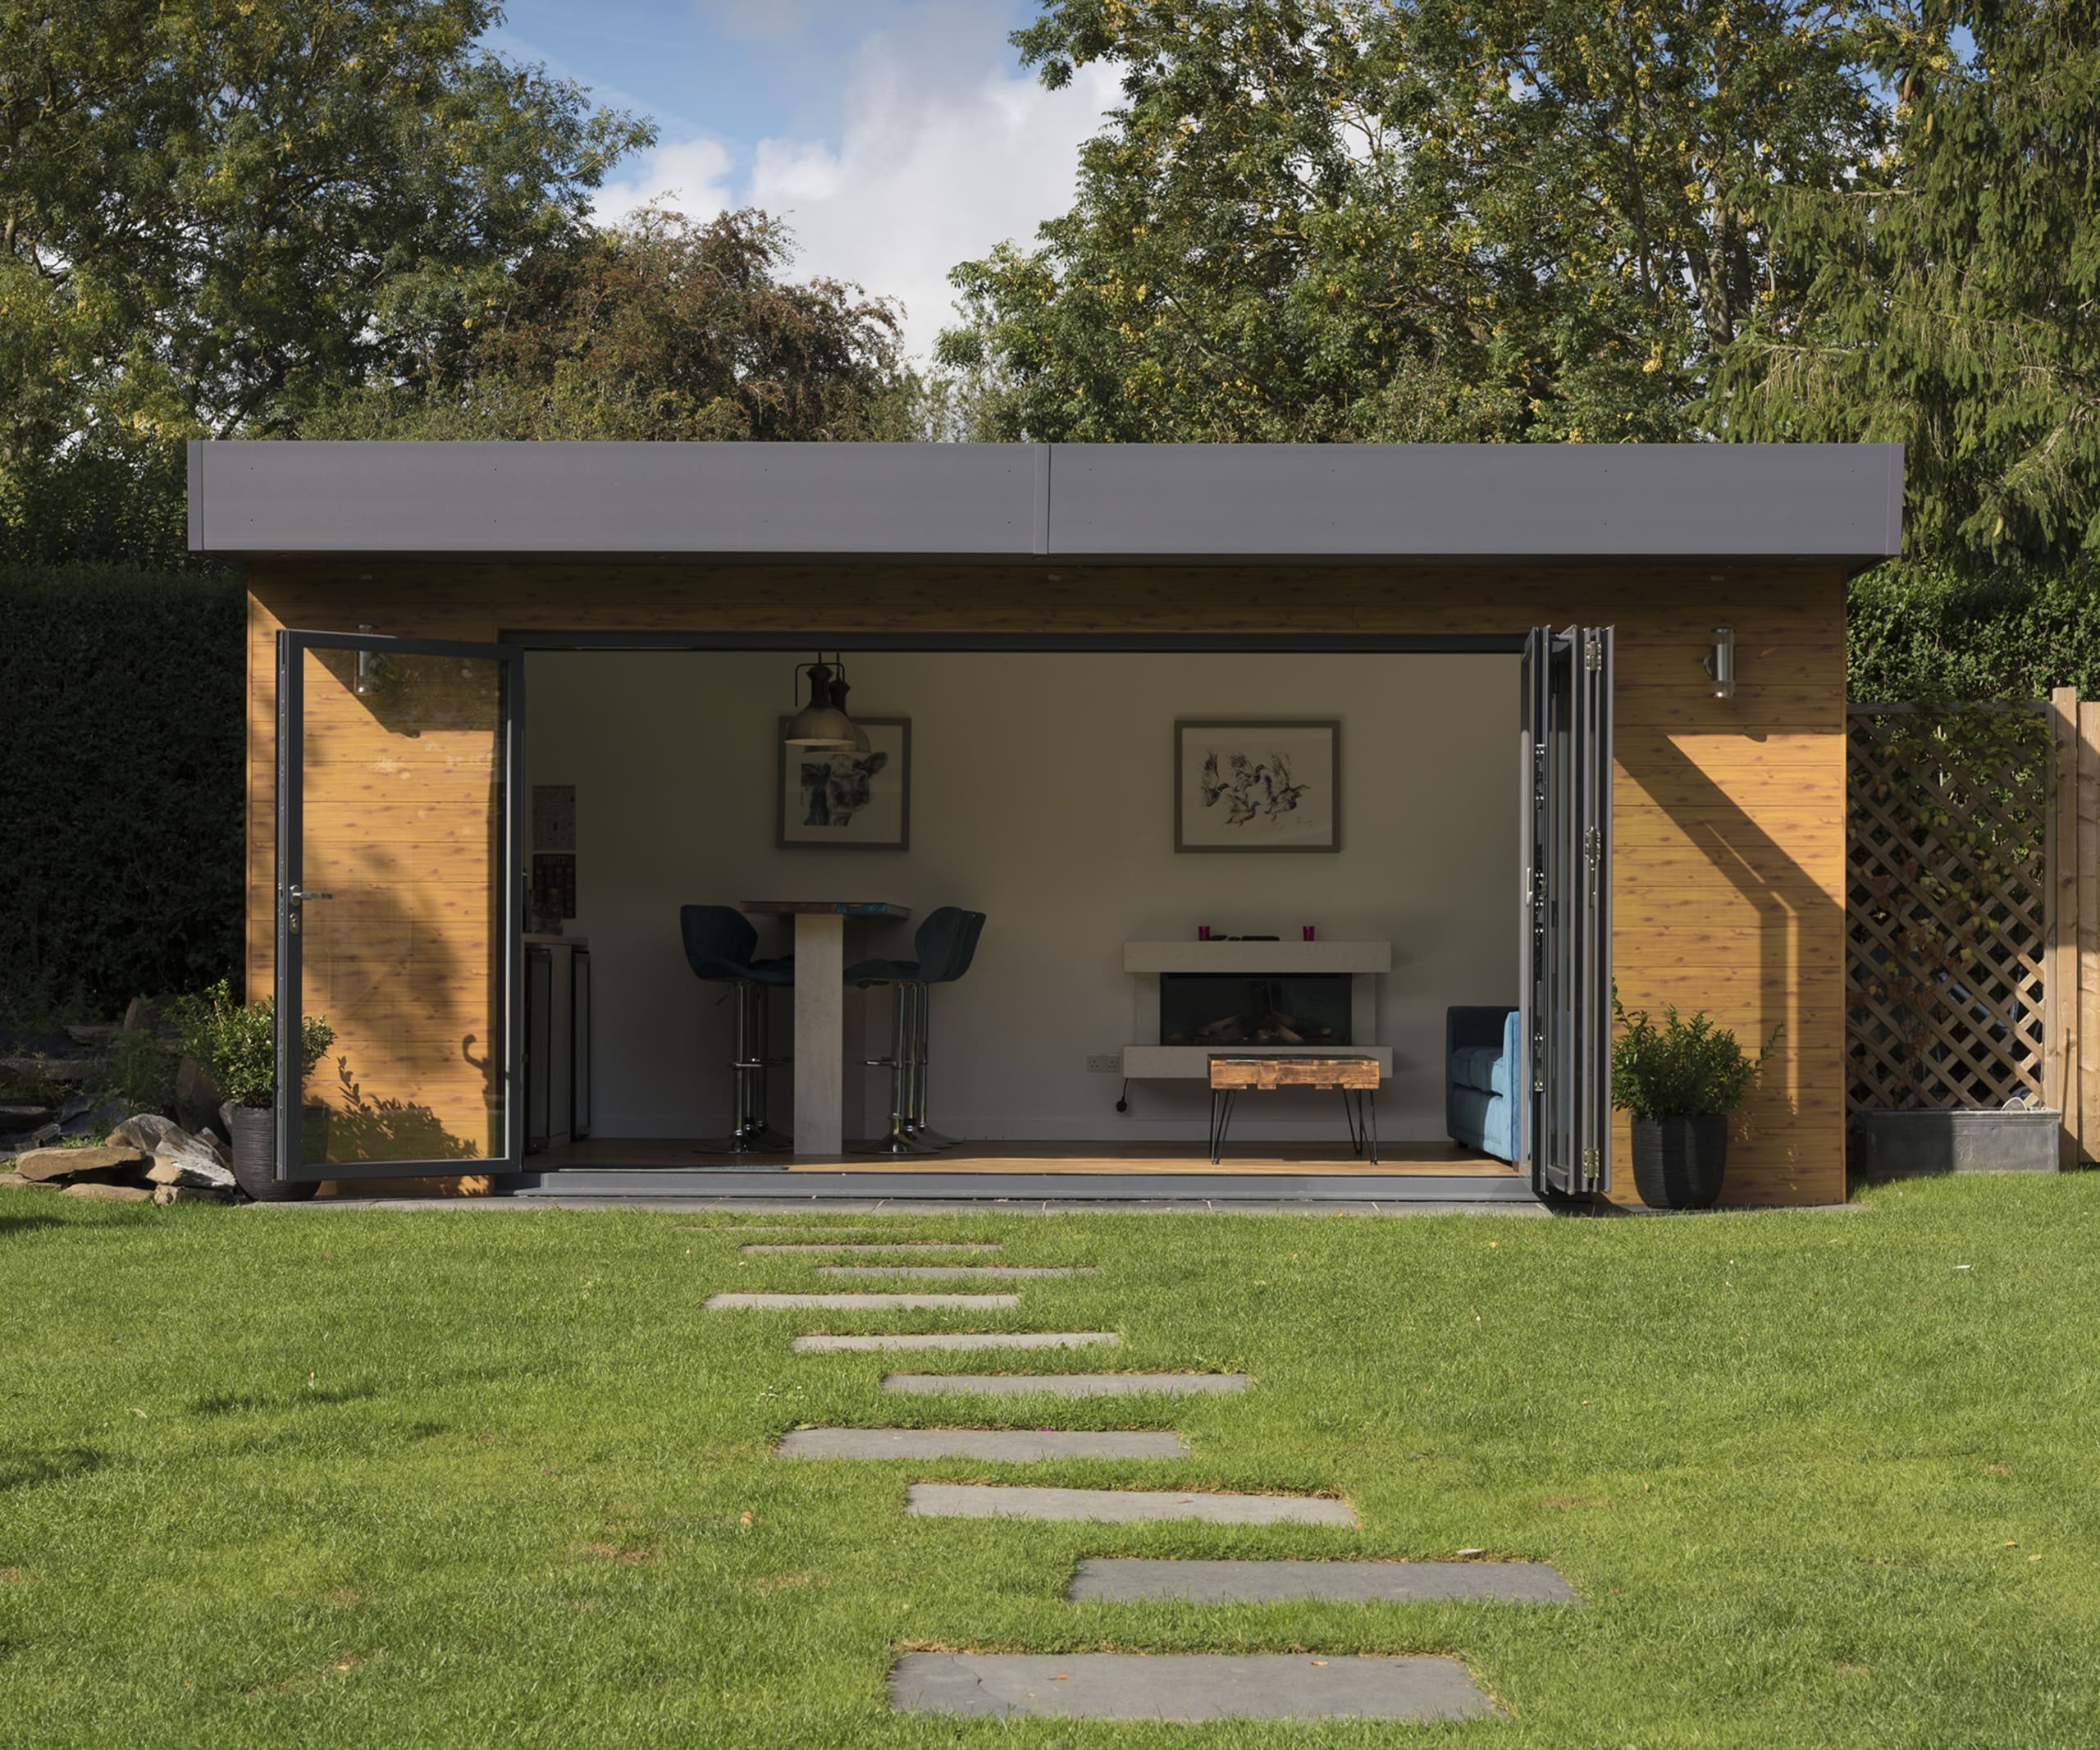 Garden office area with open bi-folding doors with timber frame surround and flat roof.